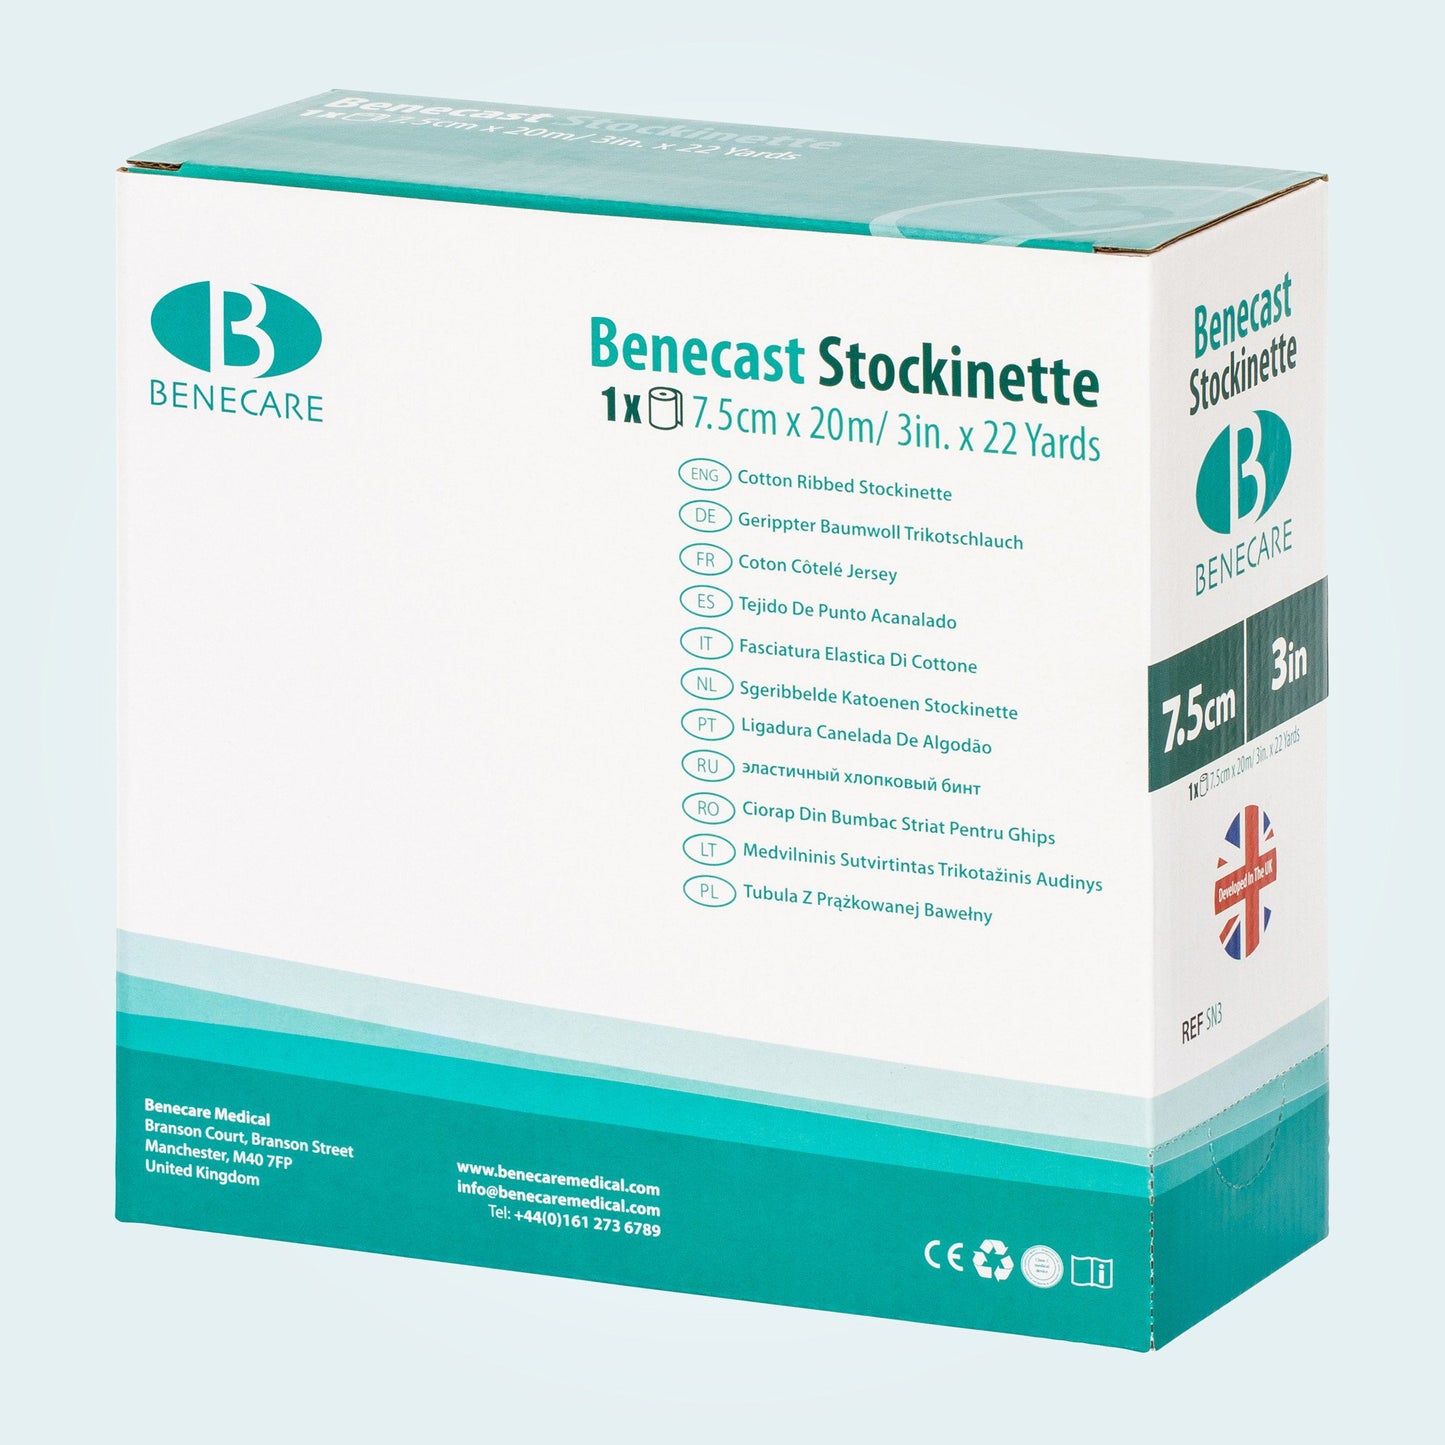 Benecast Cotton Ribbed Stockinette comes in a handy dispensor box.